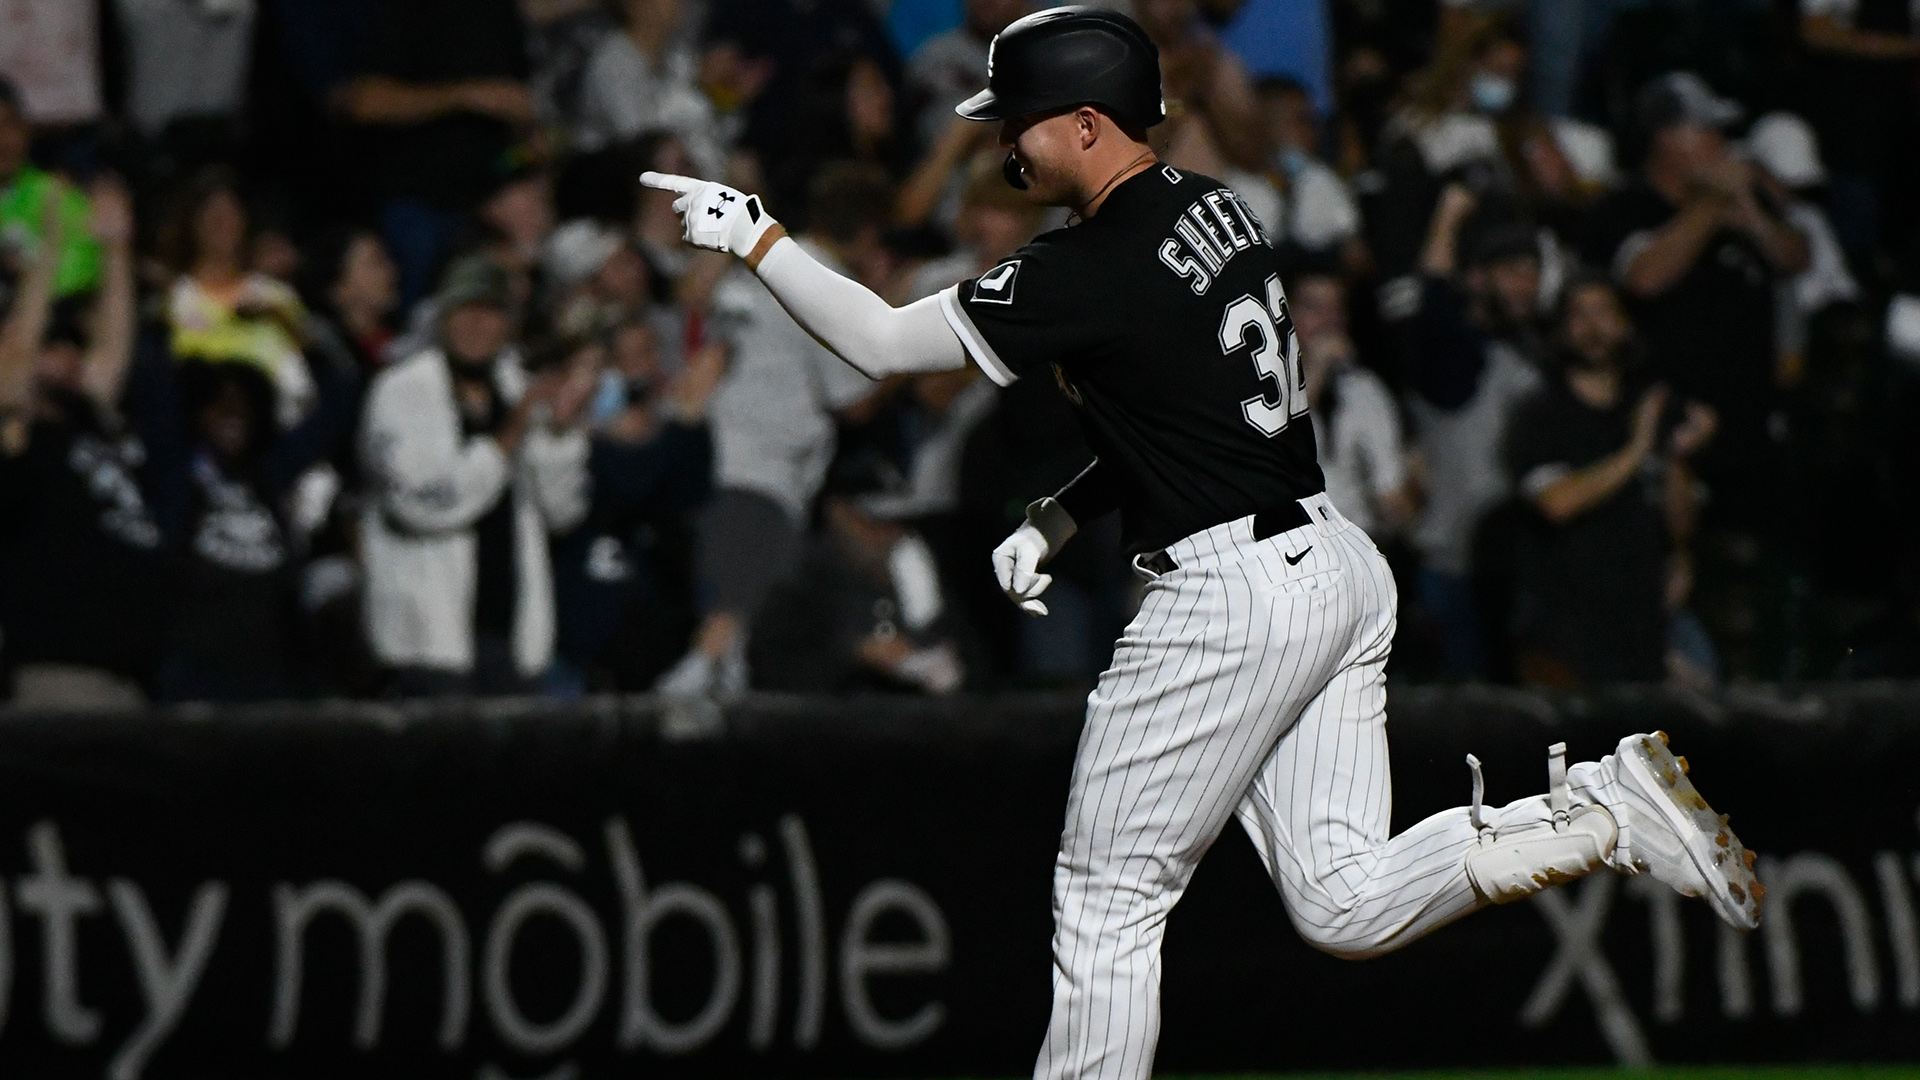 Gavin Sheets' *Other* Dad: The José Abreu Effect - South Side Sox